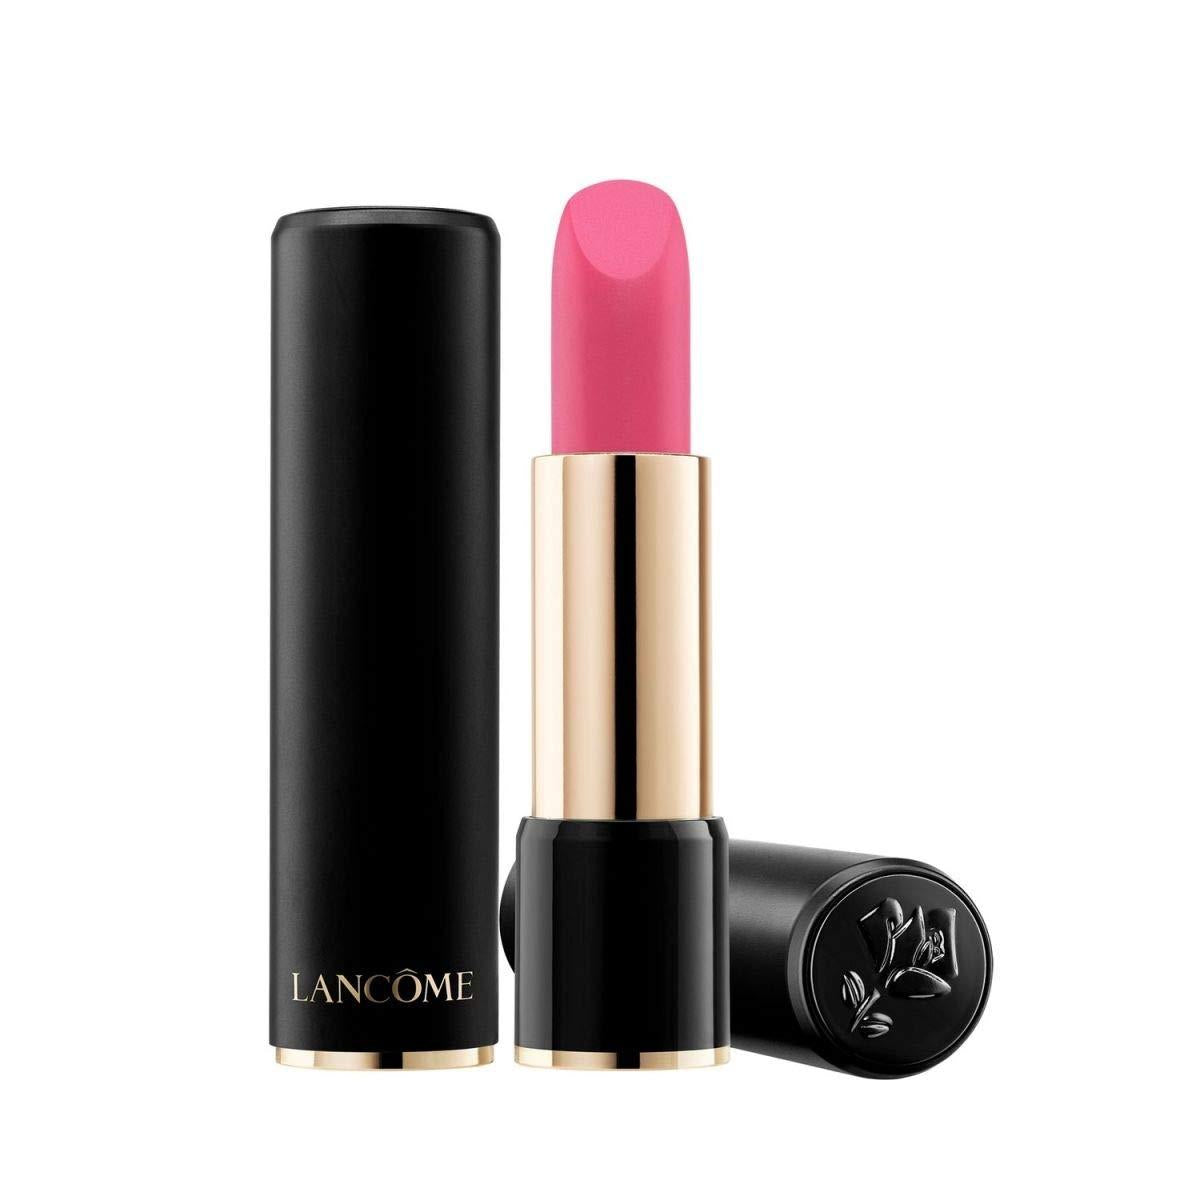 Lancome L'Absolu Rouge Drama Matte - Tester with plastic cap